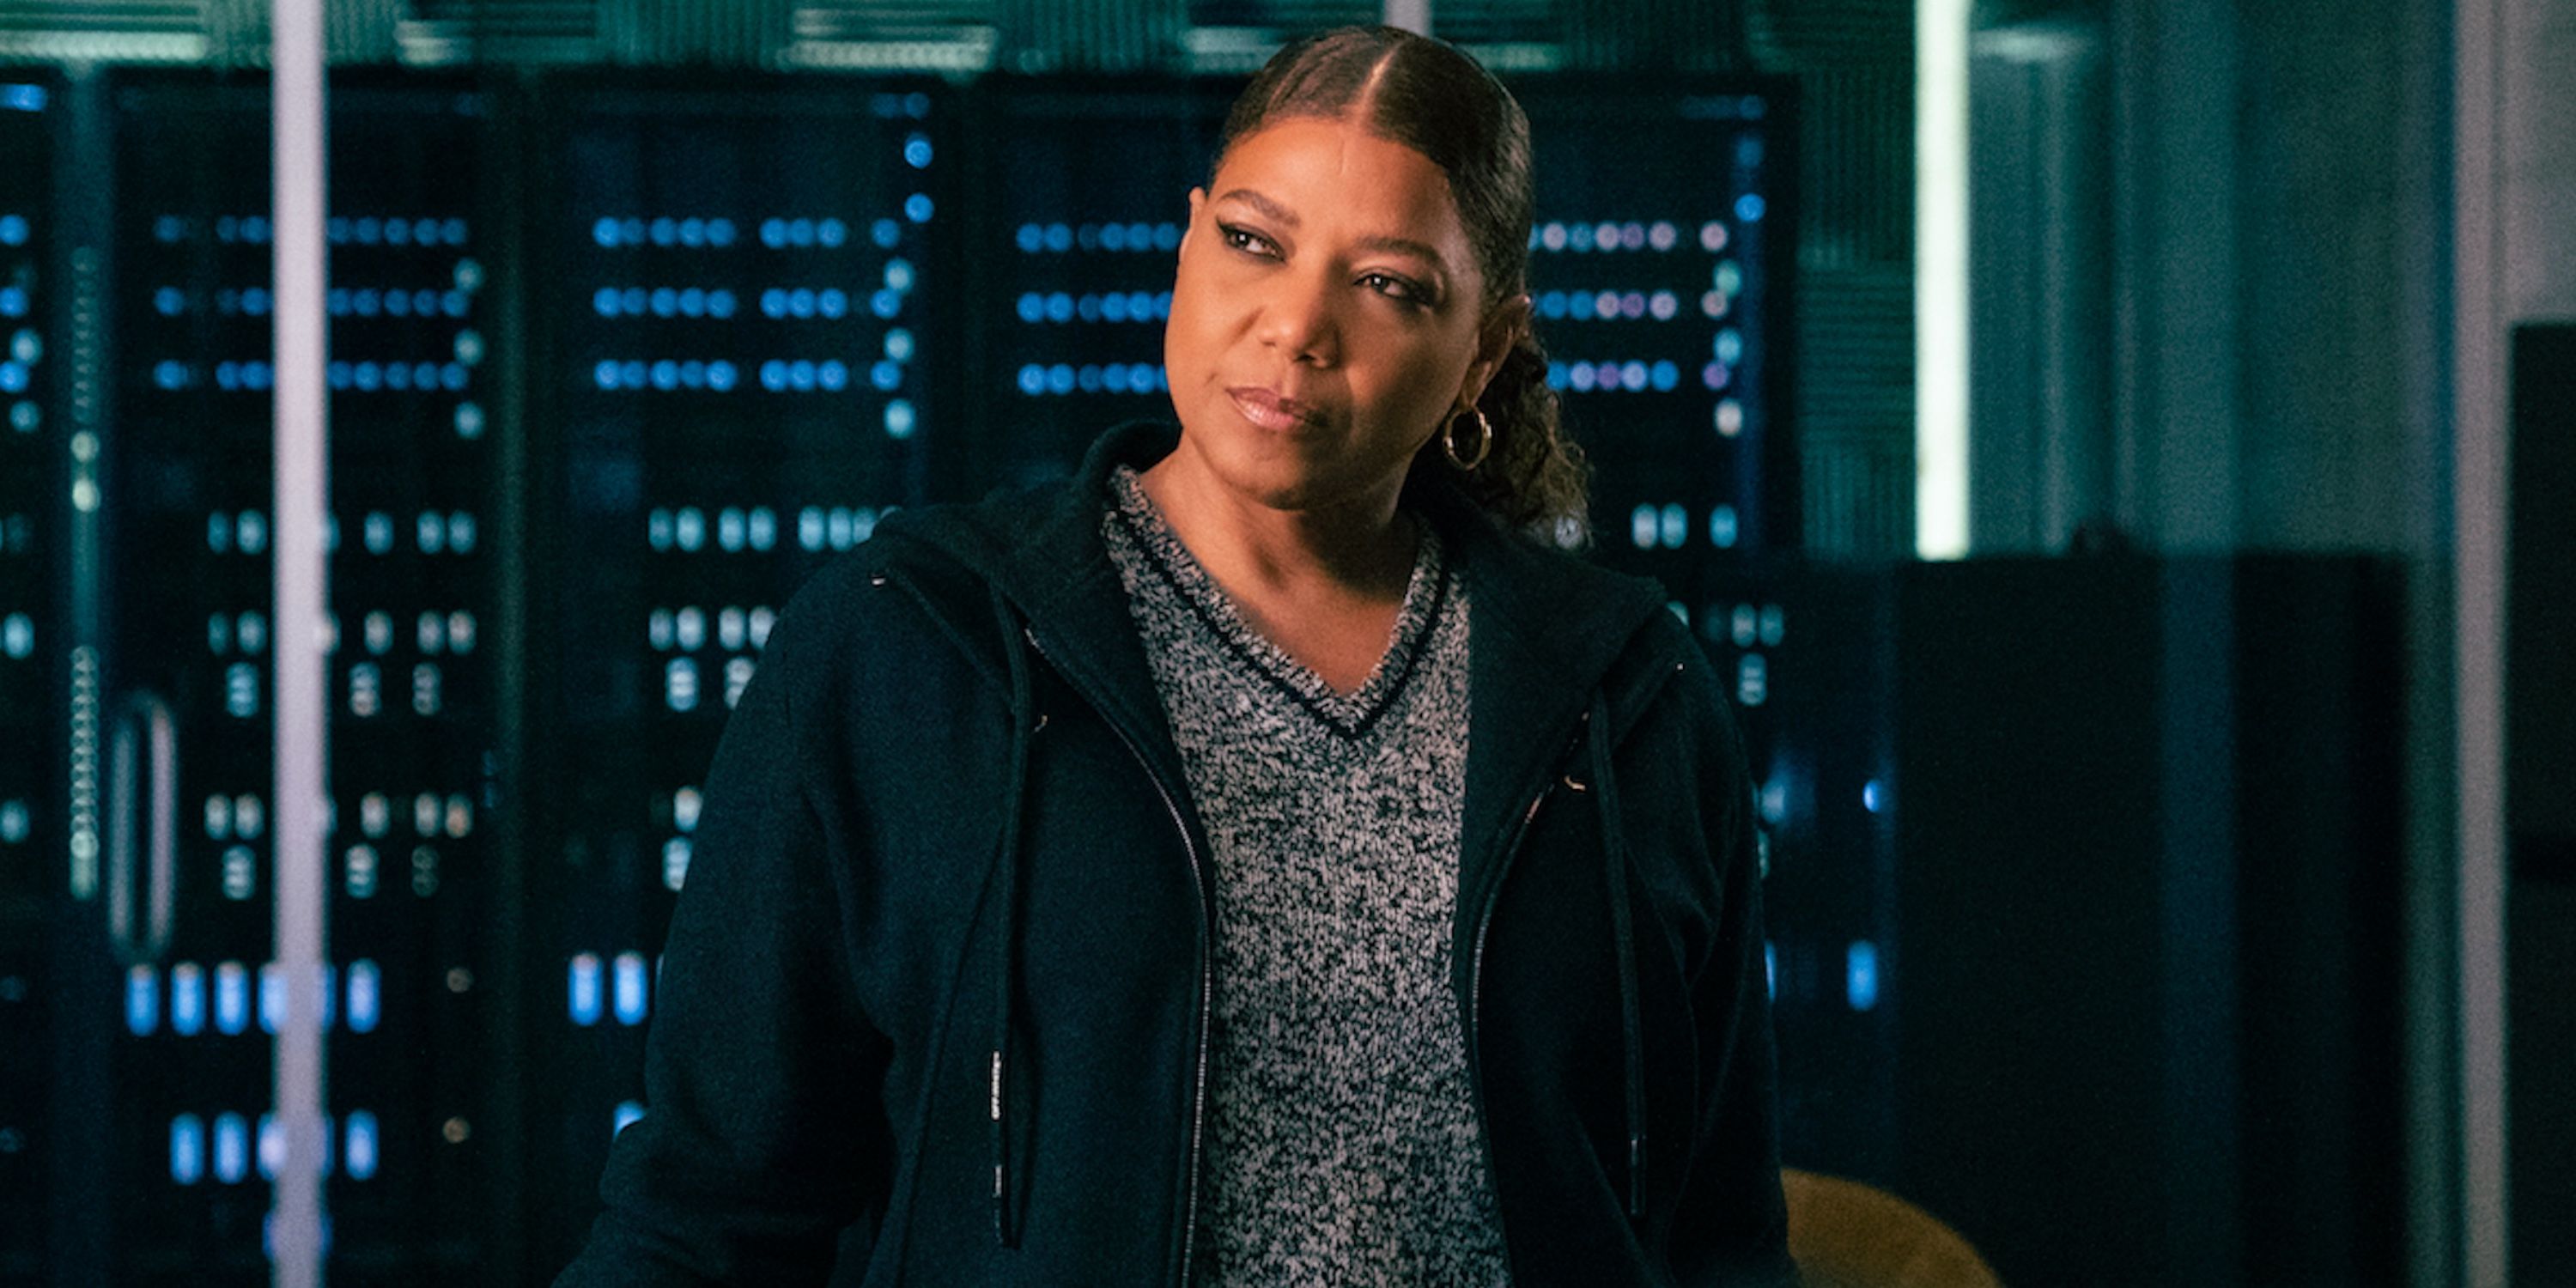 The Equalizer Special Feature Shows Why Queen Latifah Took On Classic